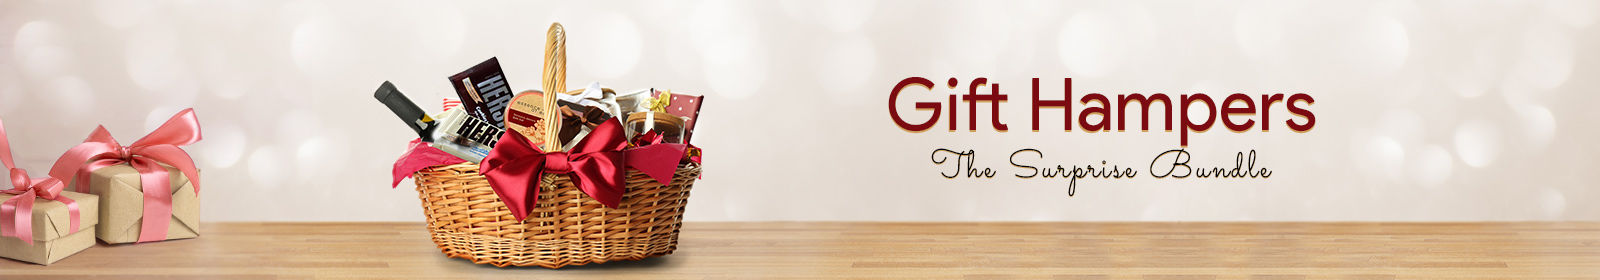 Gifts Hampers Gifts to australia